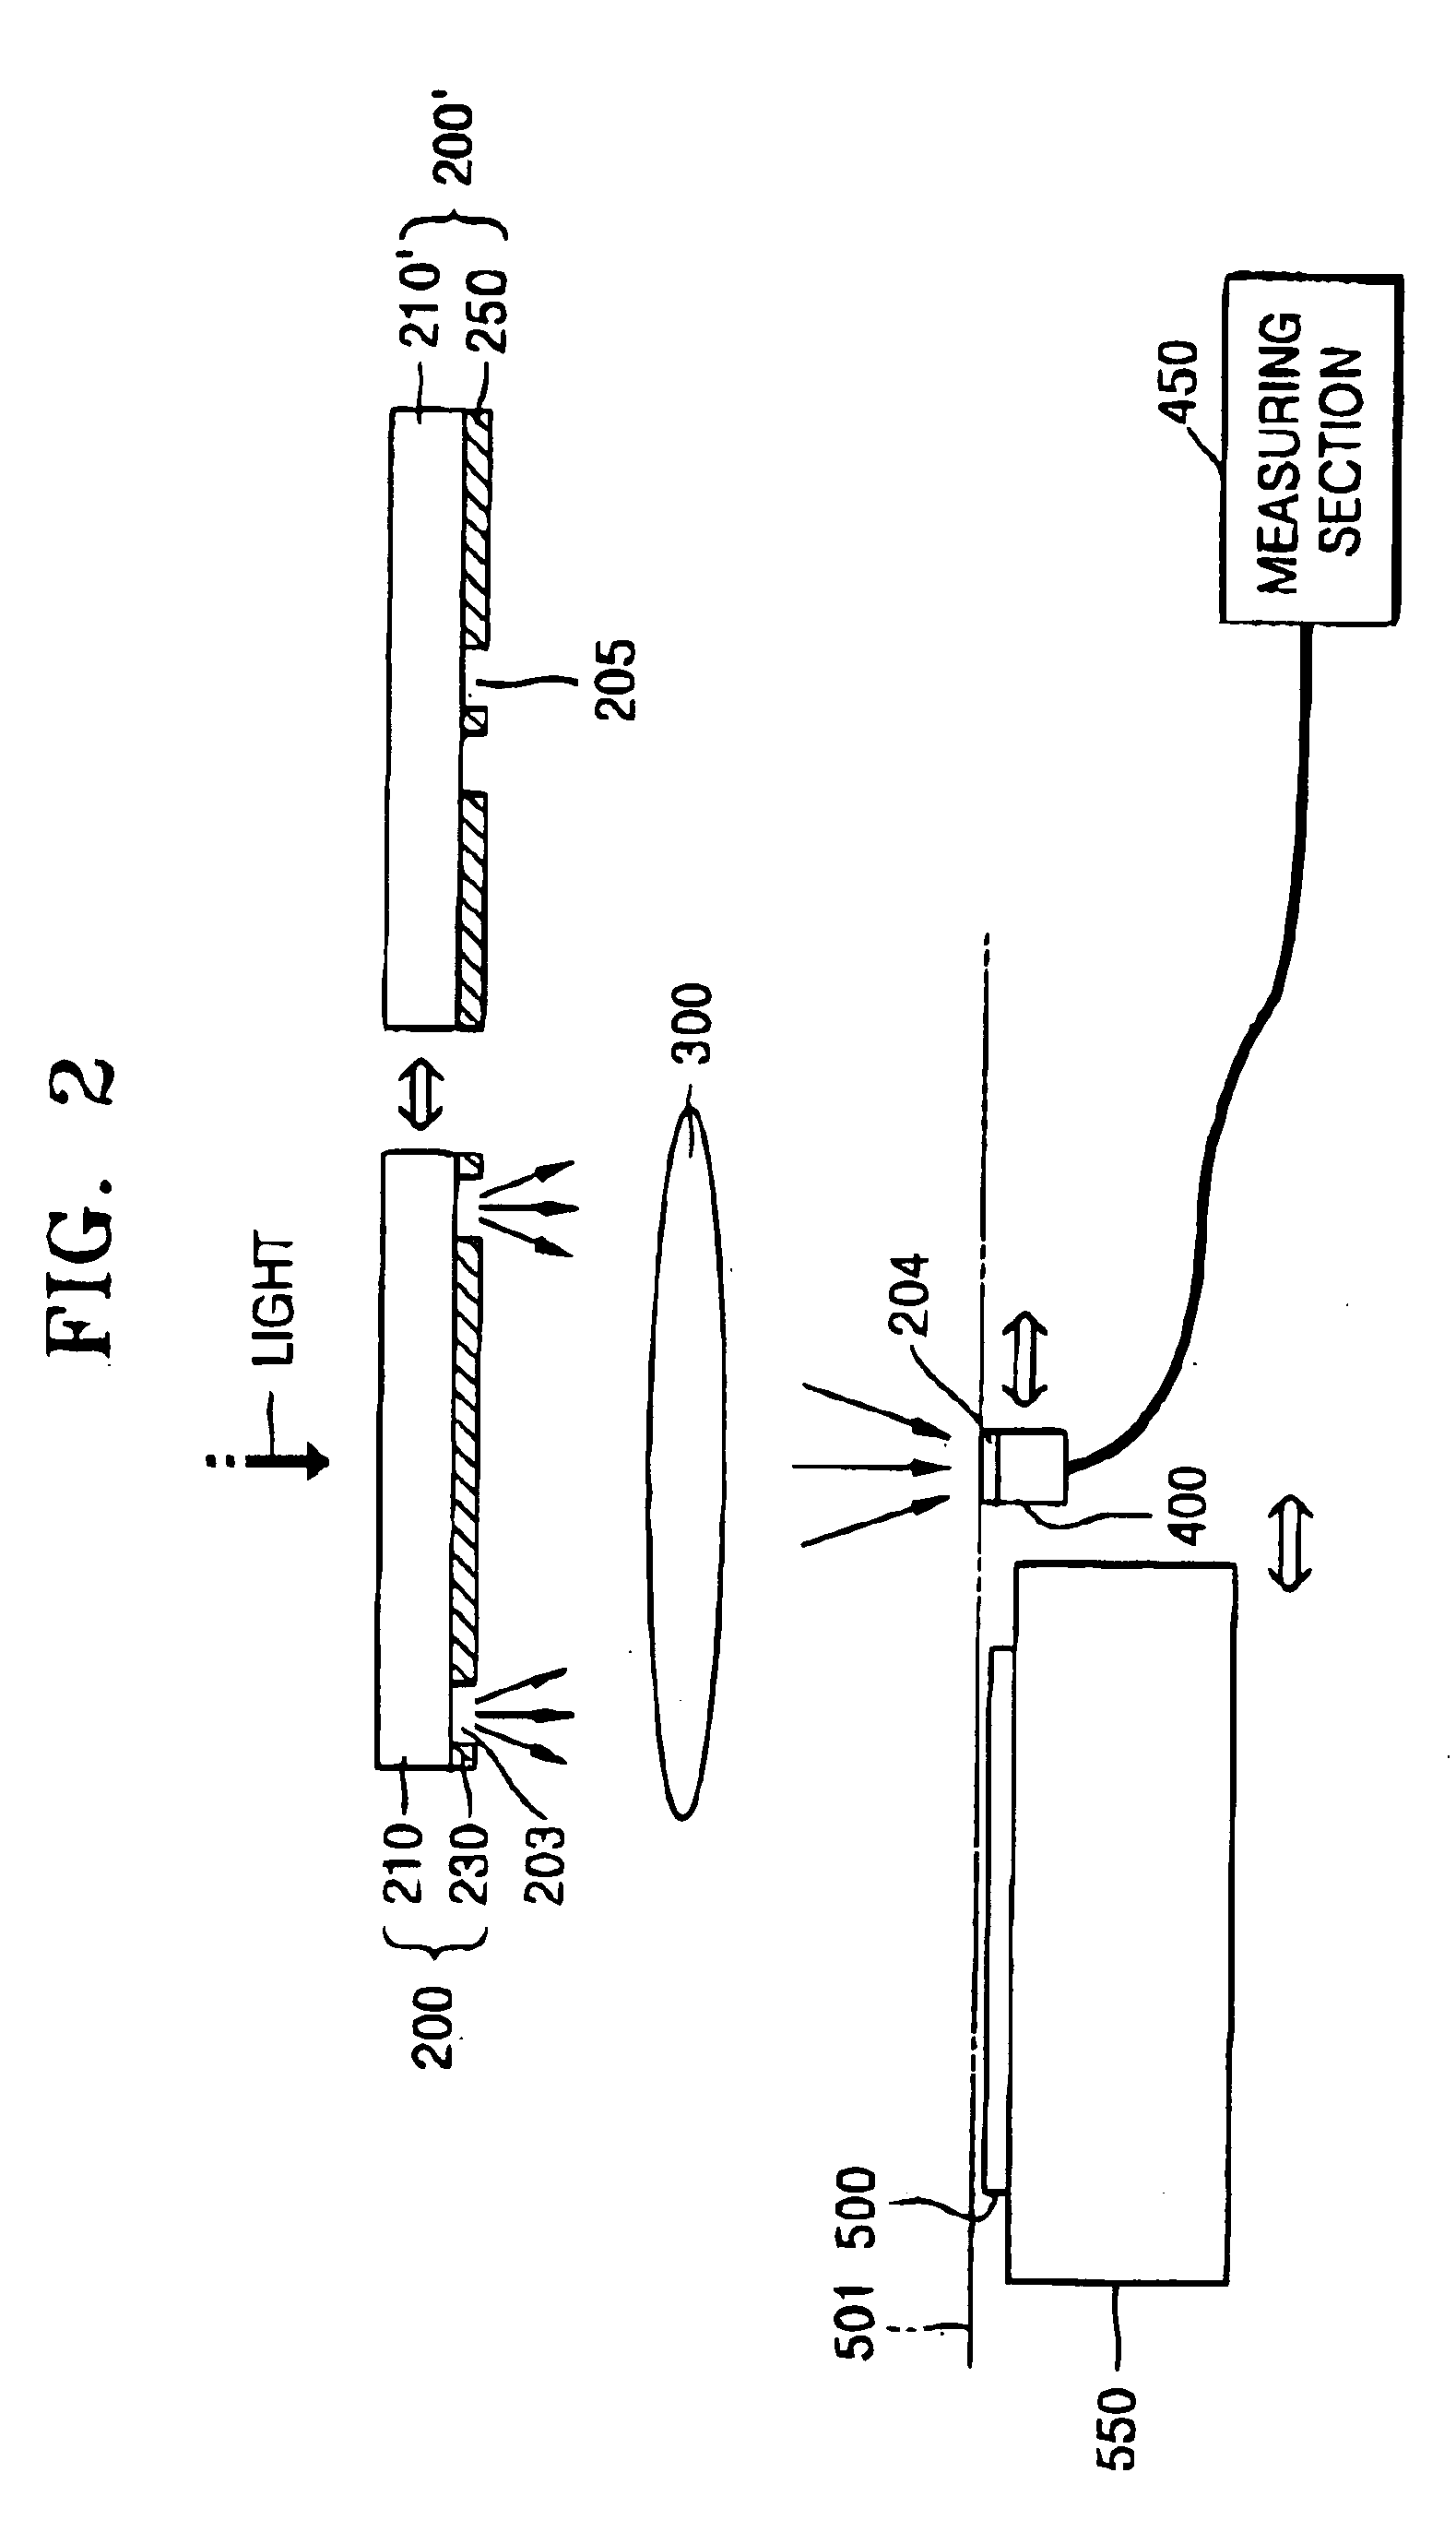 Method and system for measuring stray light